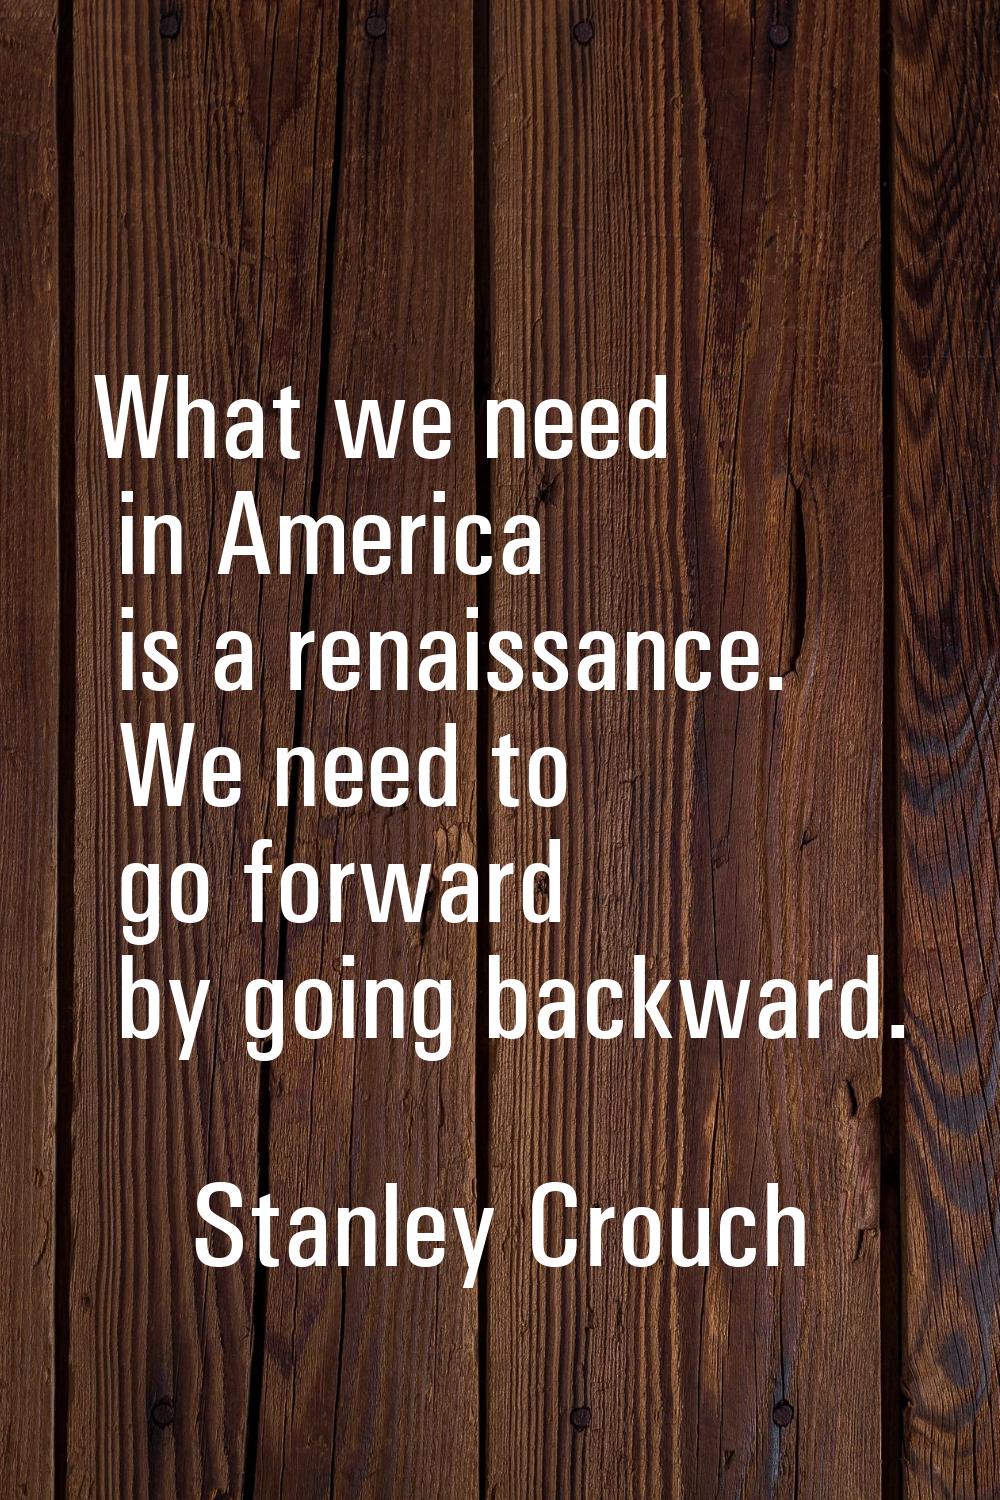 What we need in America is a renaissance. We need to go forward by going backward.